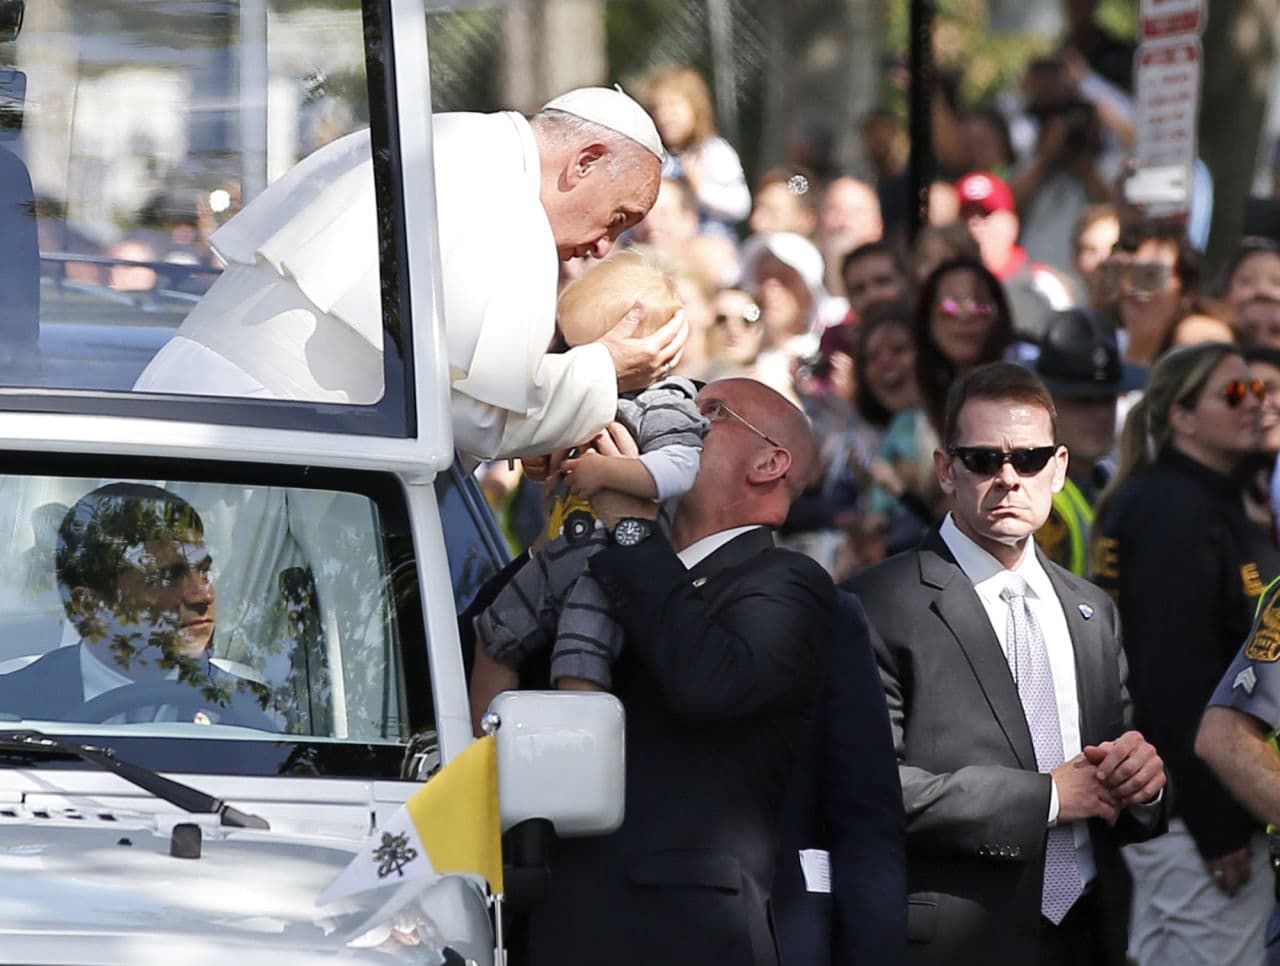 Pope Francis holds the head of a small child as he leans from the popemobile during a parade. (Alex Brandon/AP)